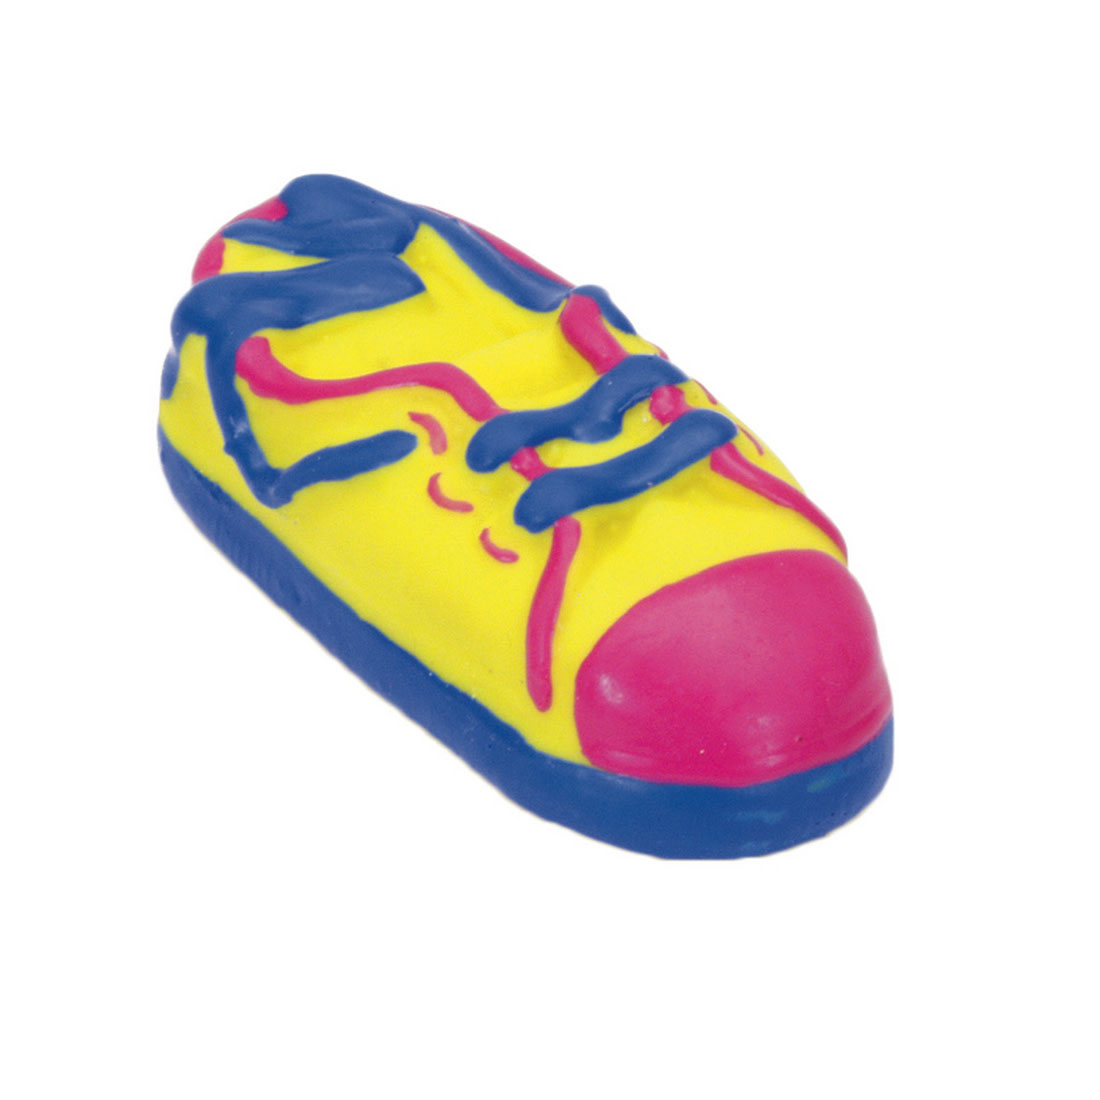 Rascals® 3.5" Latex Small Tennis Shoe Dog Toy